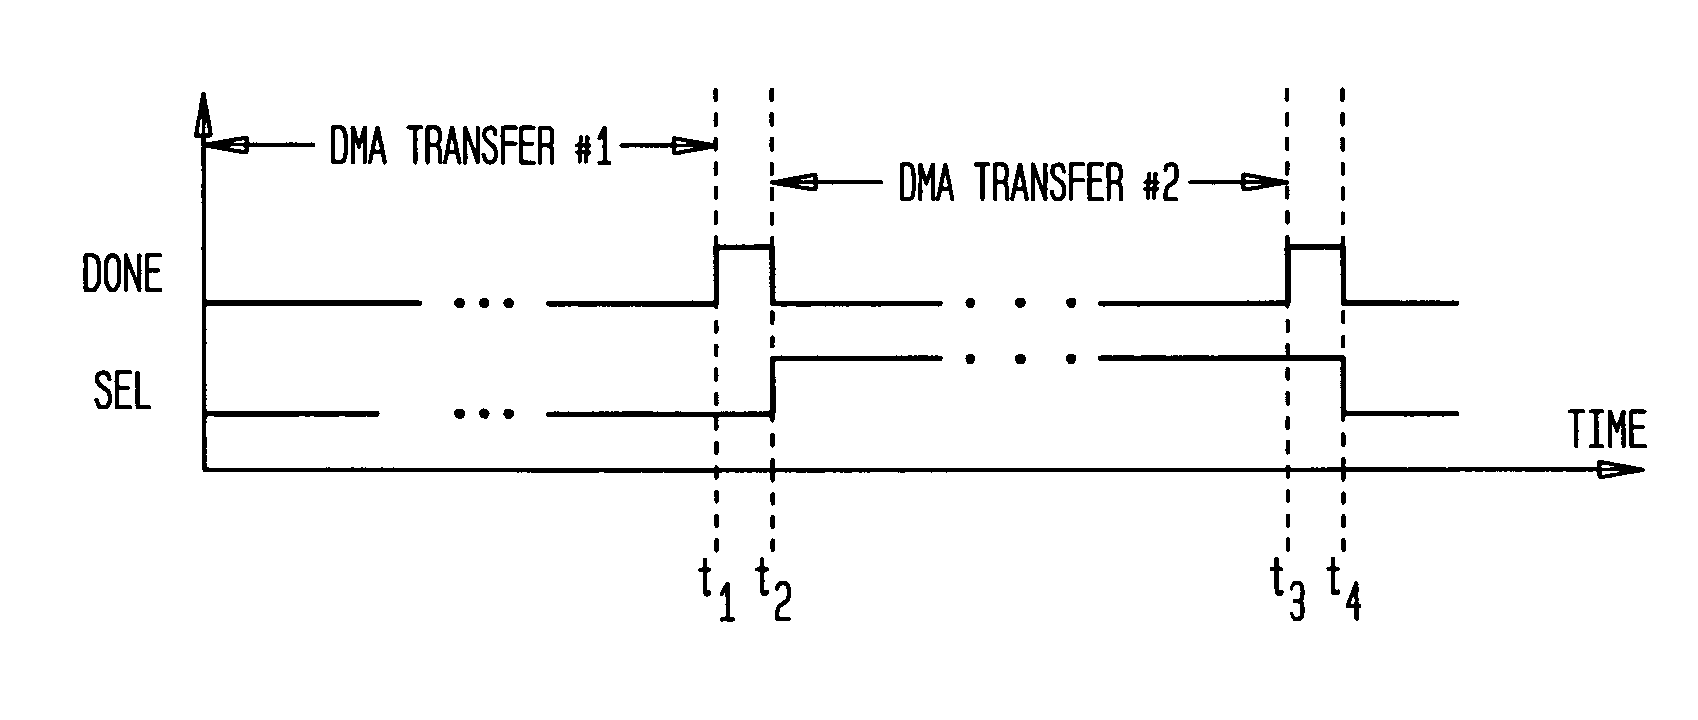 Emulation of independent active DMA channels with a single DMA capable bus master hardware and firmware